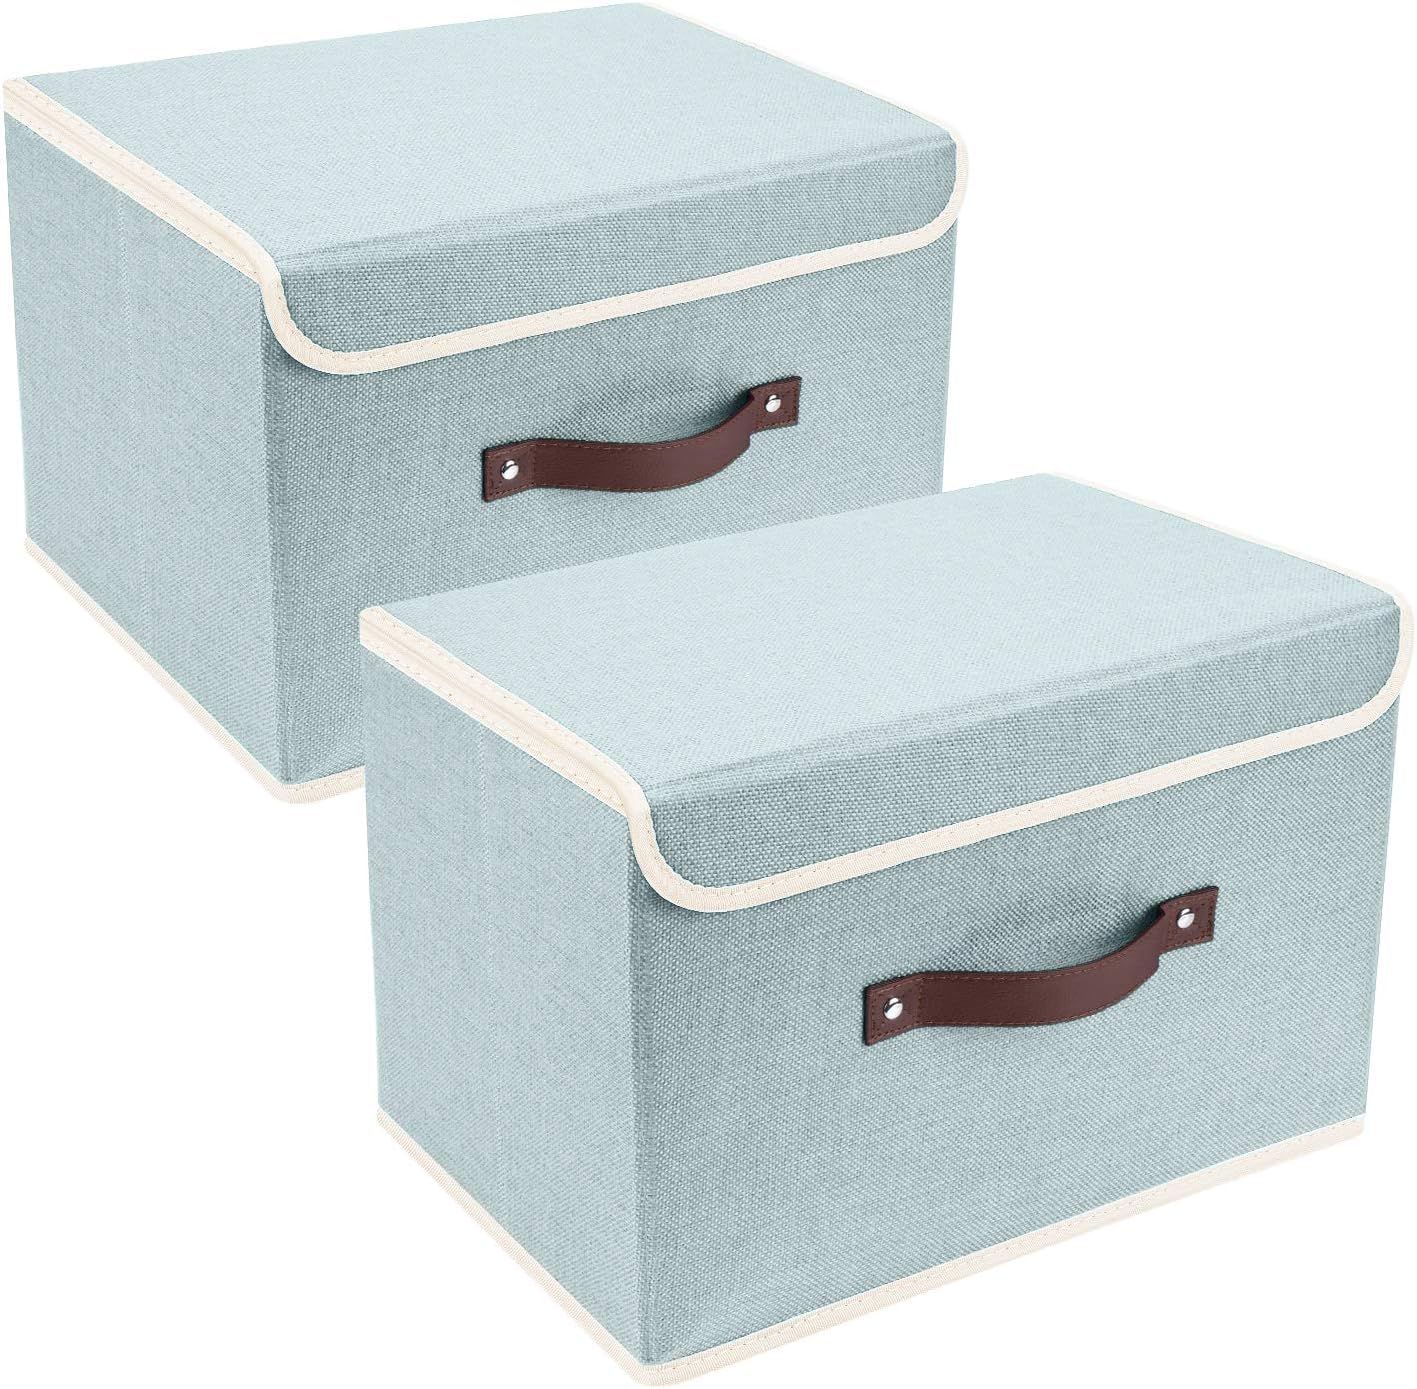 TYEERS Foldable Storage Bins 2 Pack Fabric Storage Boxes with Lids and Handles Storage Organizers... | Amazon (US)